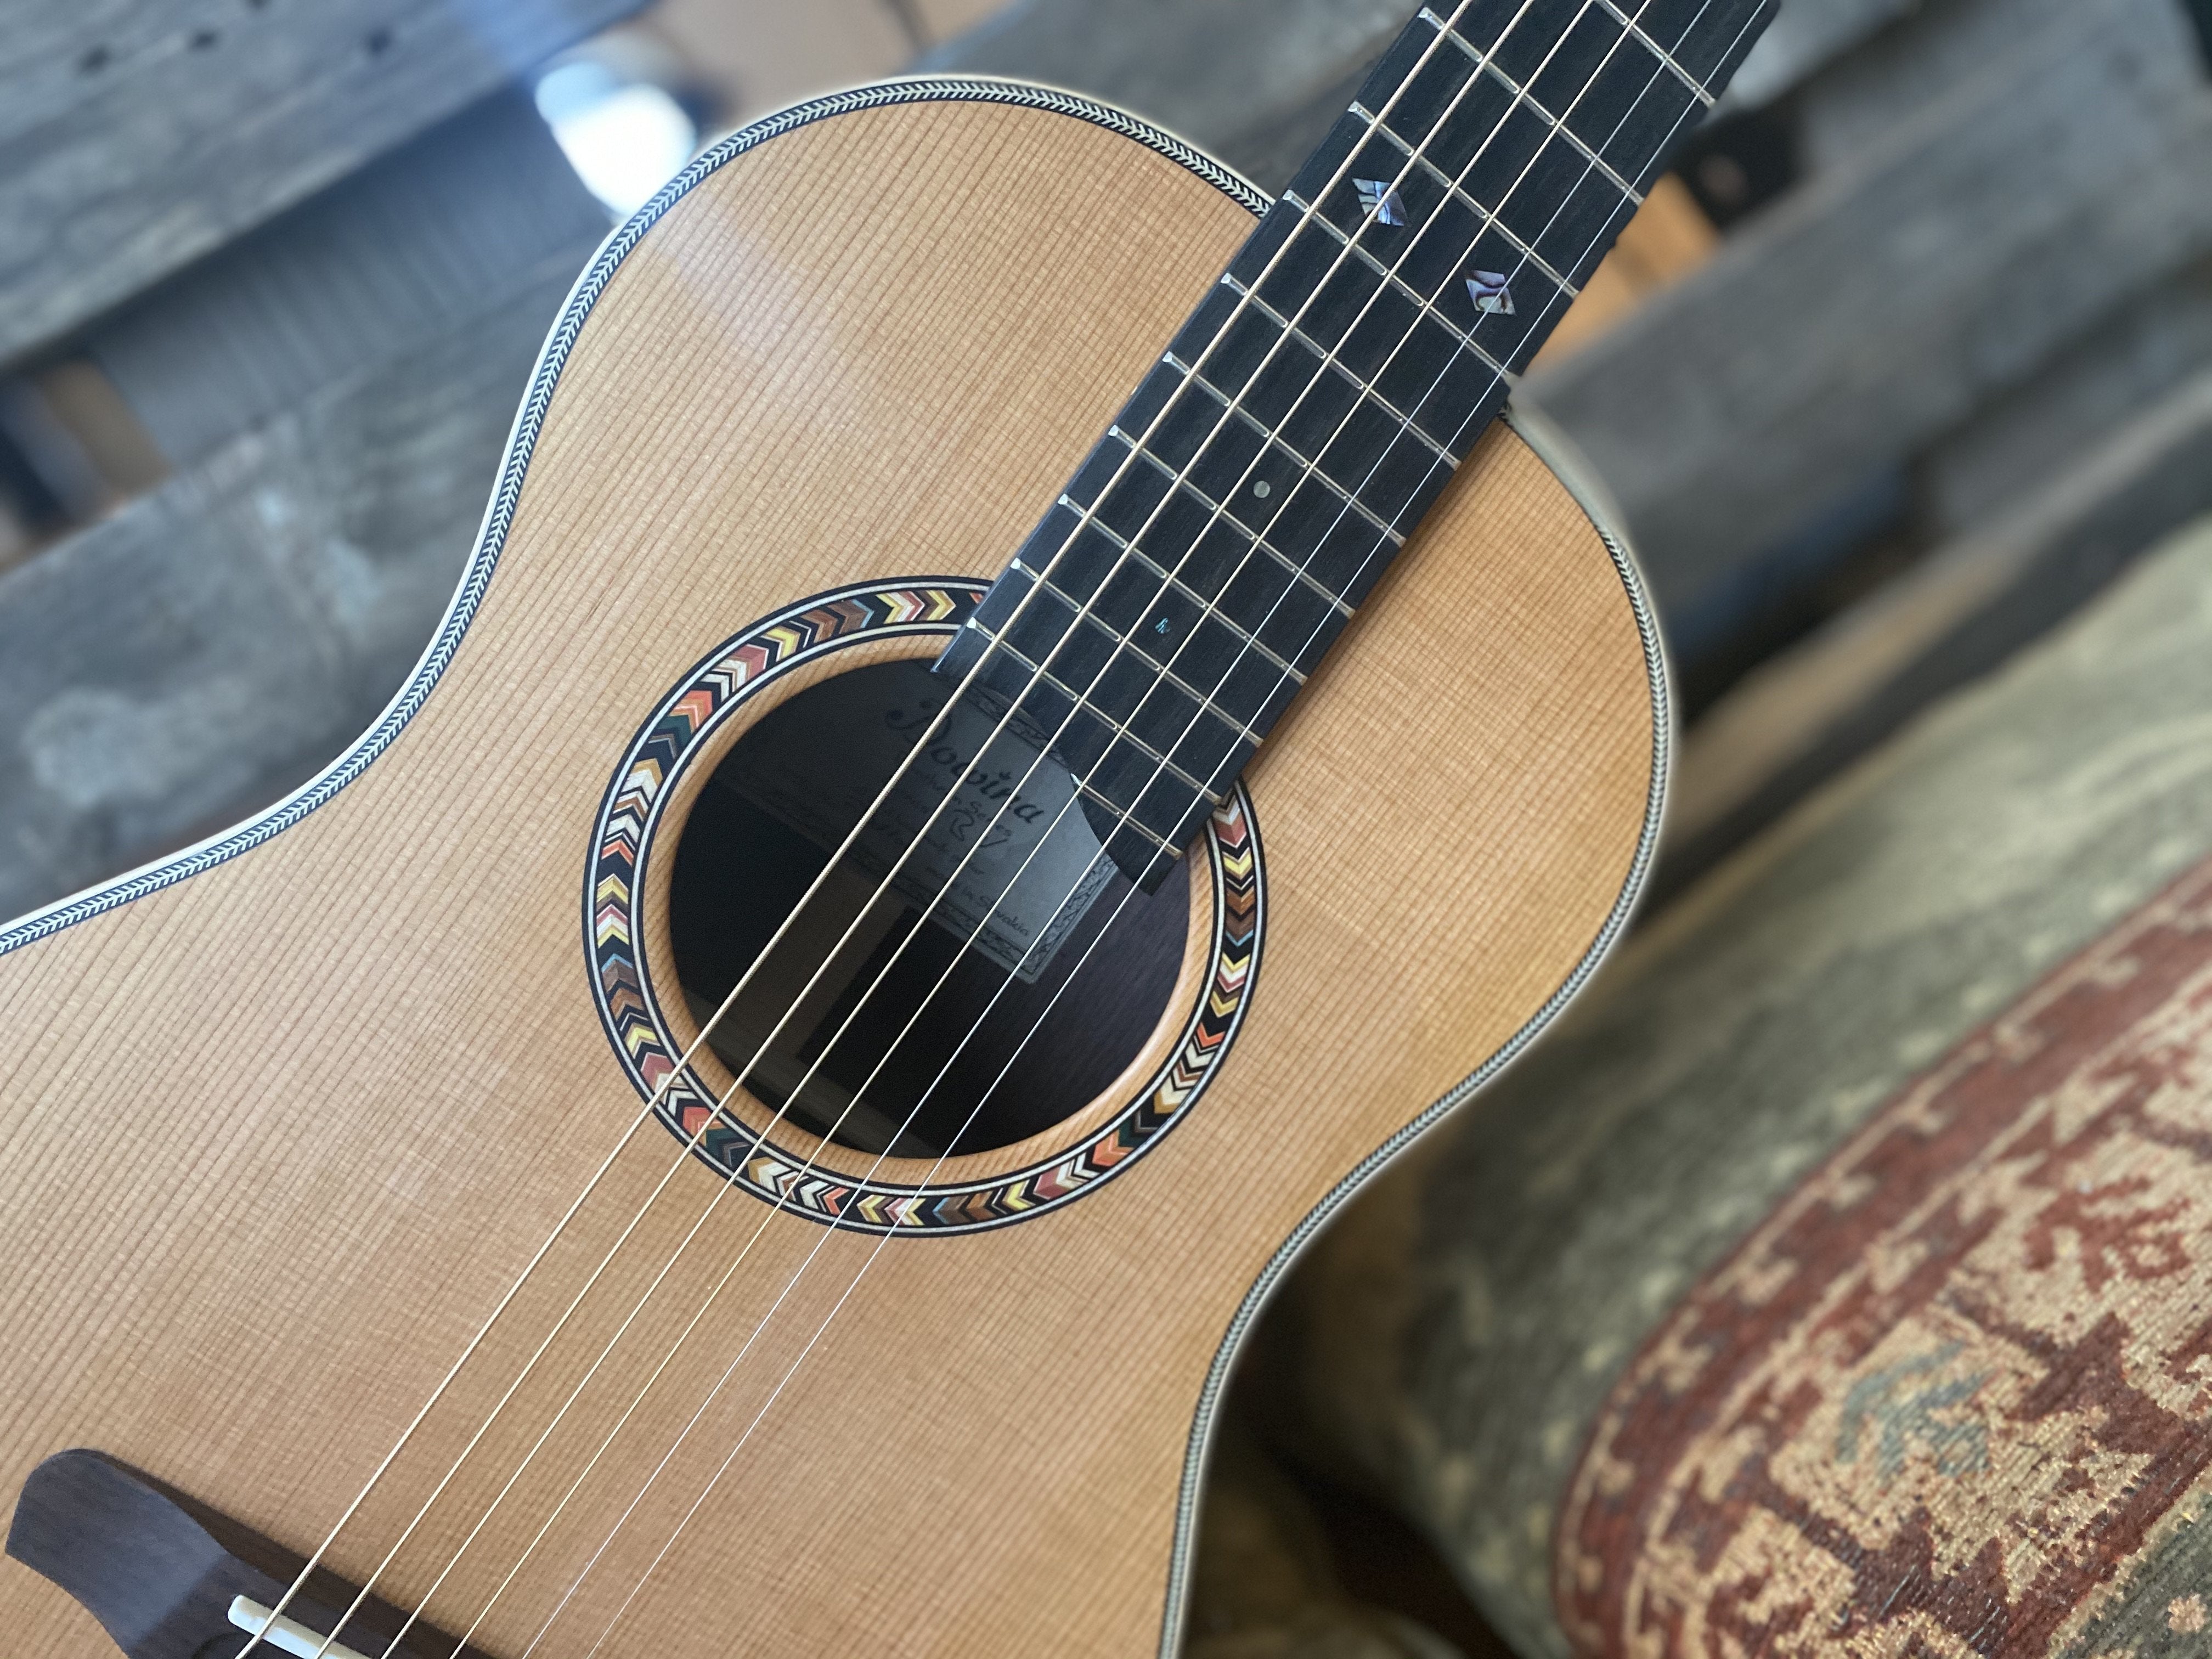 Dowina Rosewood (Ceres) BV, Acoustic Guitar for sale at Richards Guitars.